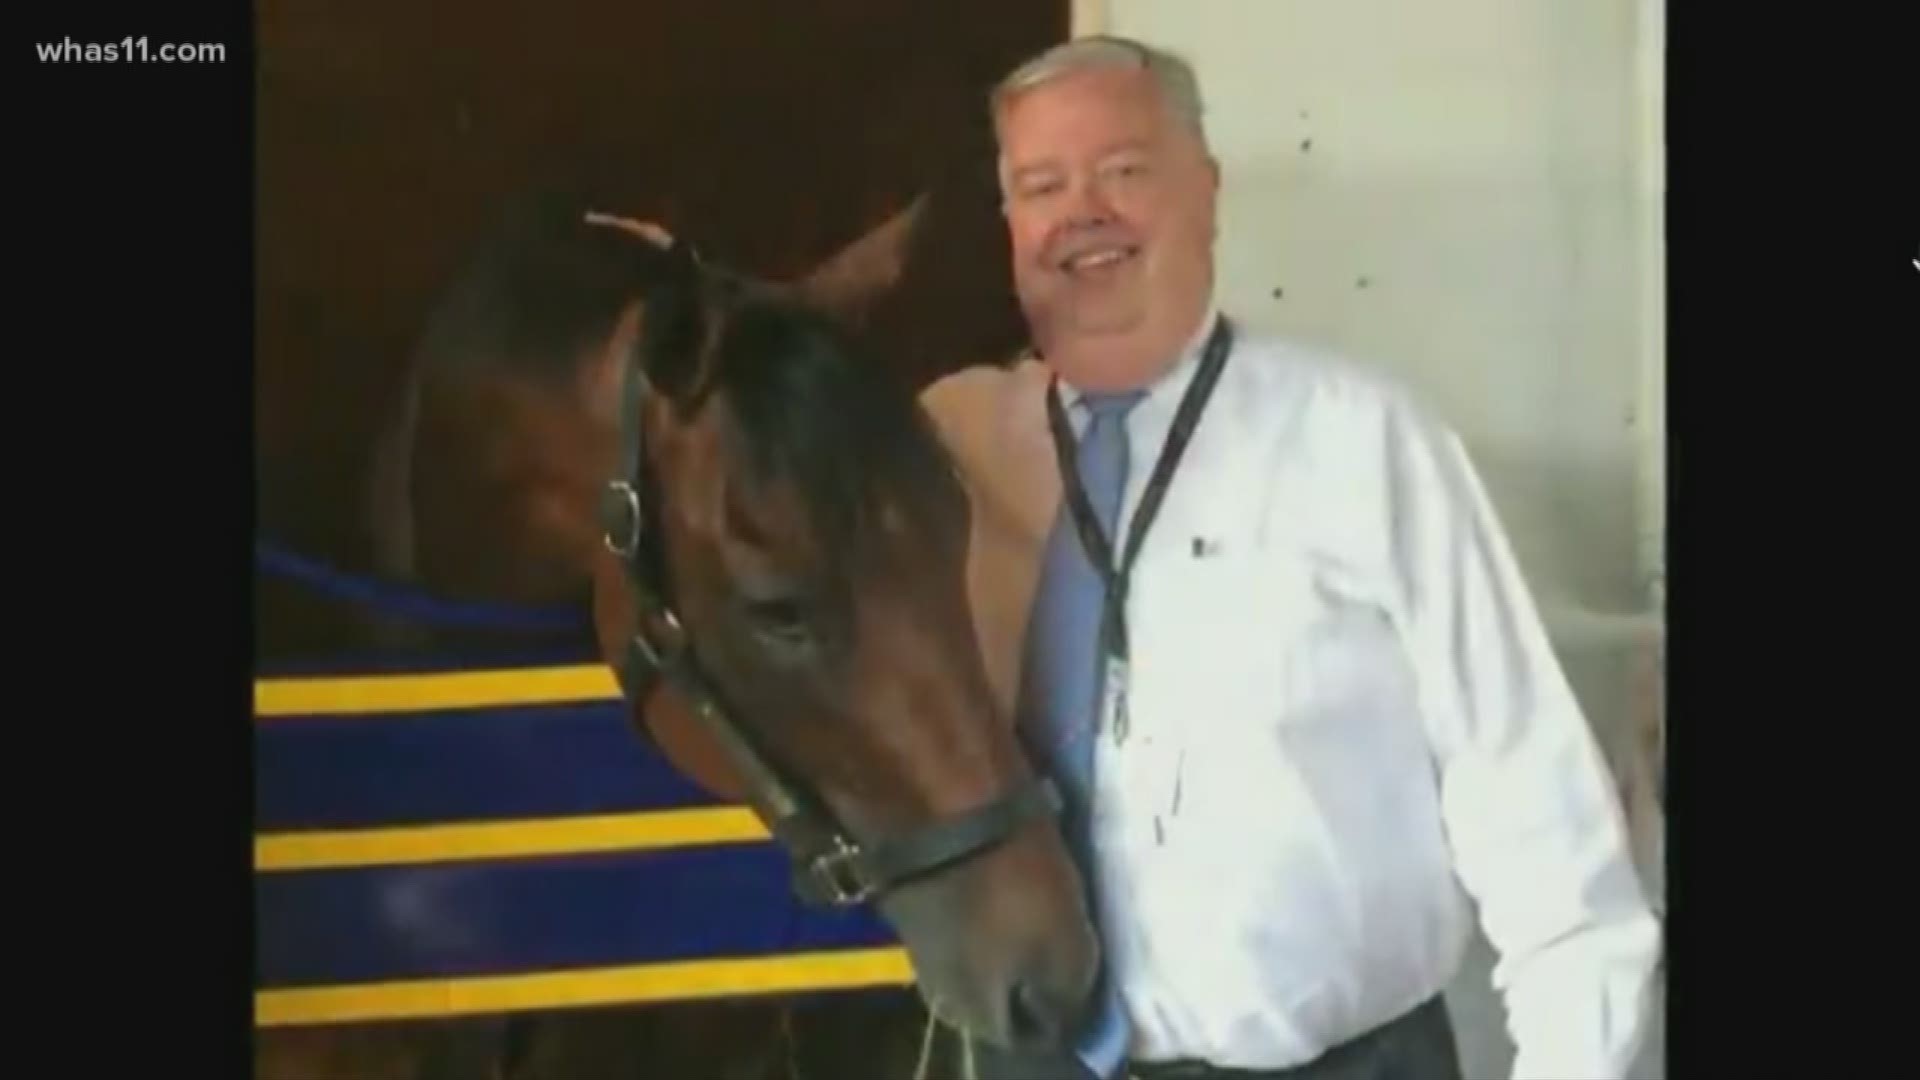 A somber day at Churchill Downs with visitation underway right now for John Asher -- who was the track's Vice President of Communications.